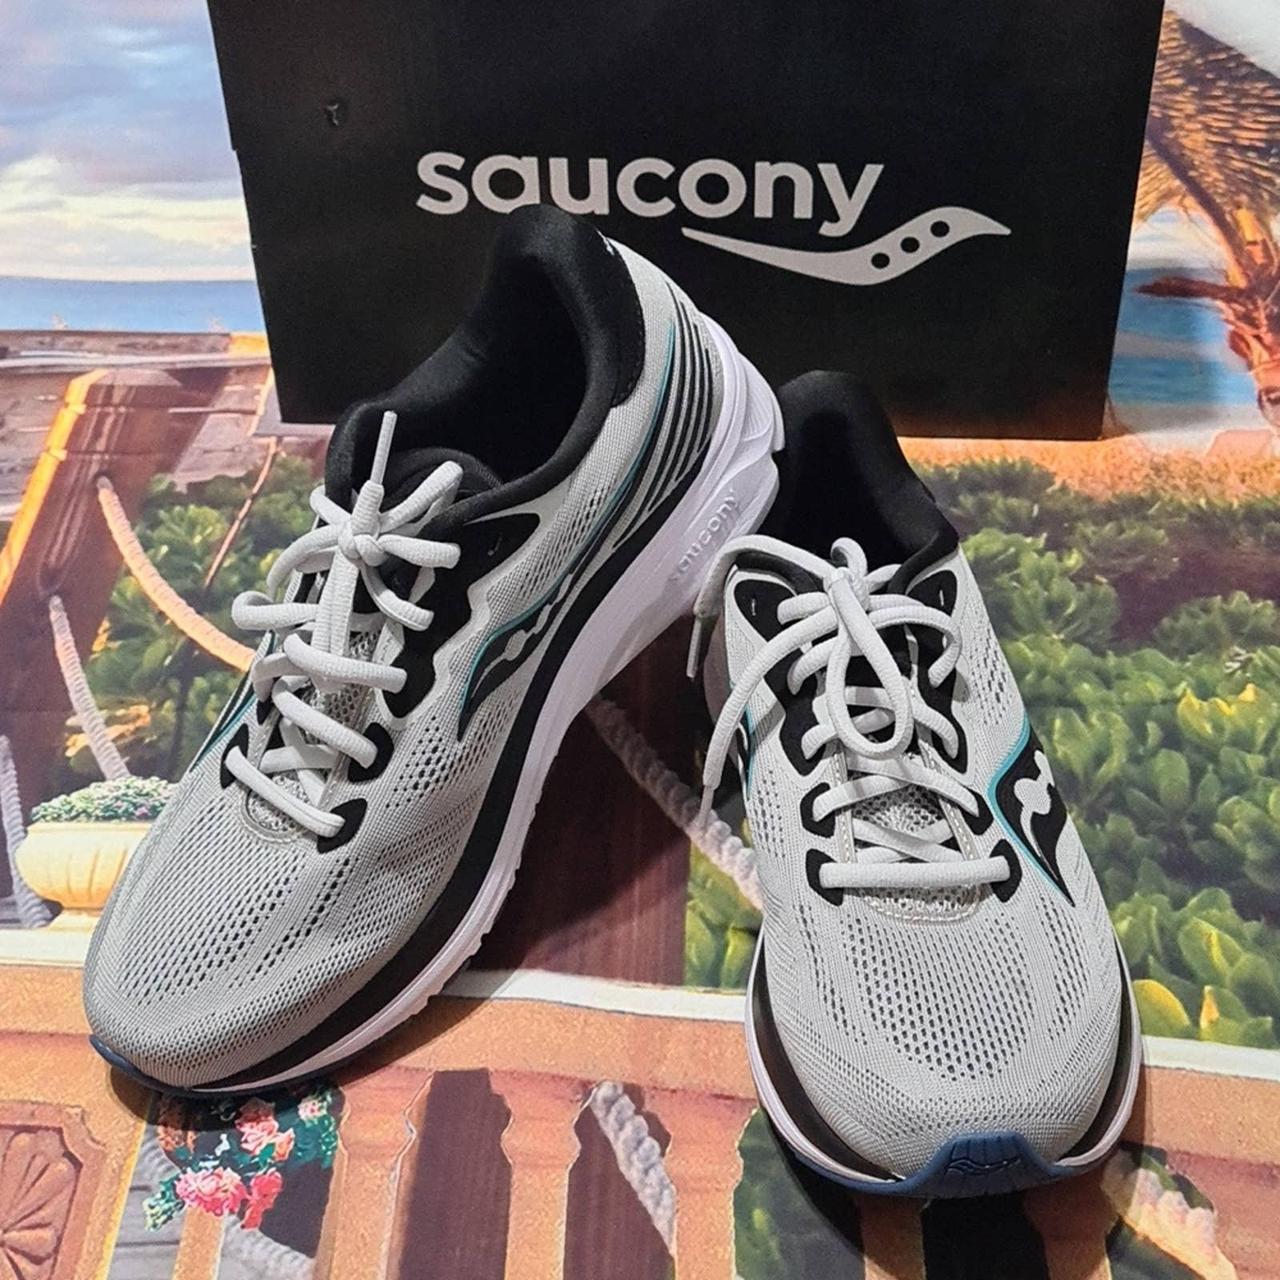 Product Image 1 - Saucony Ride 14 Shoes Size